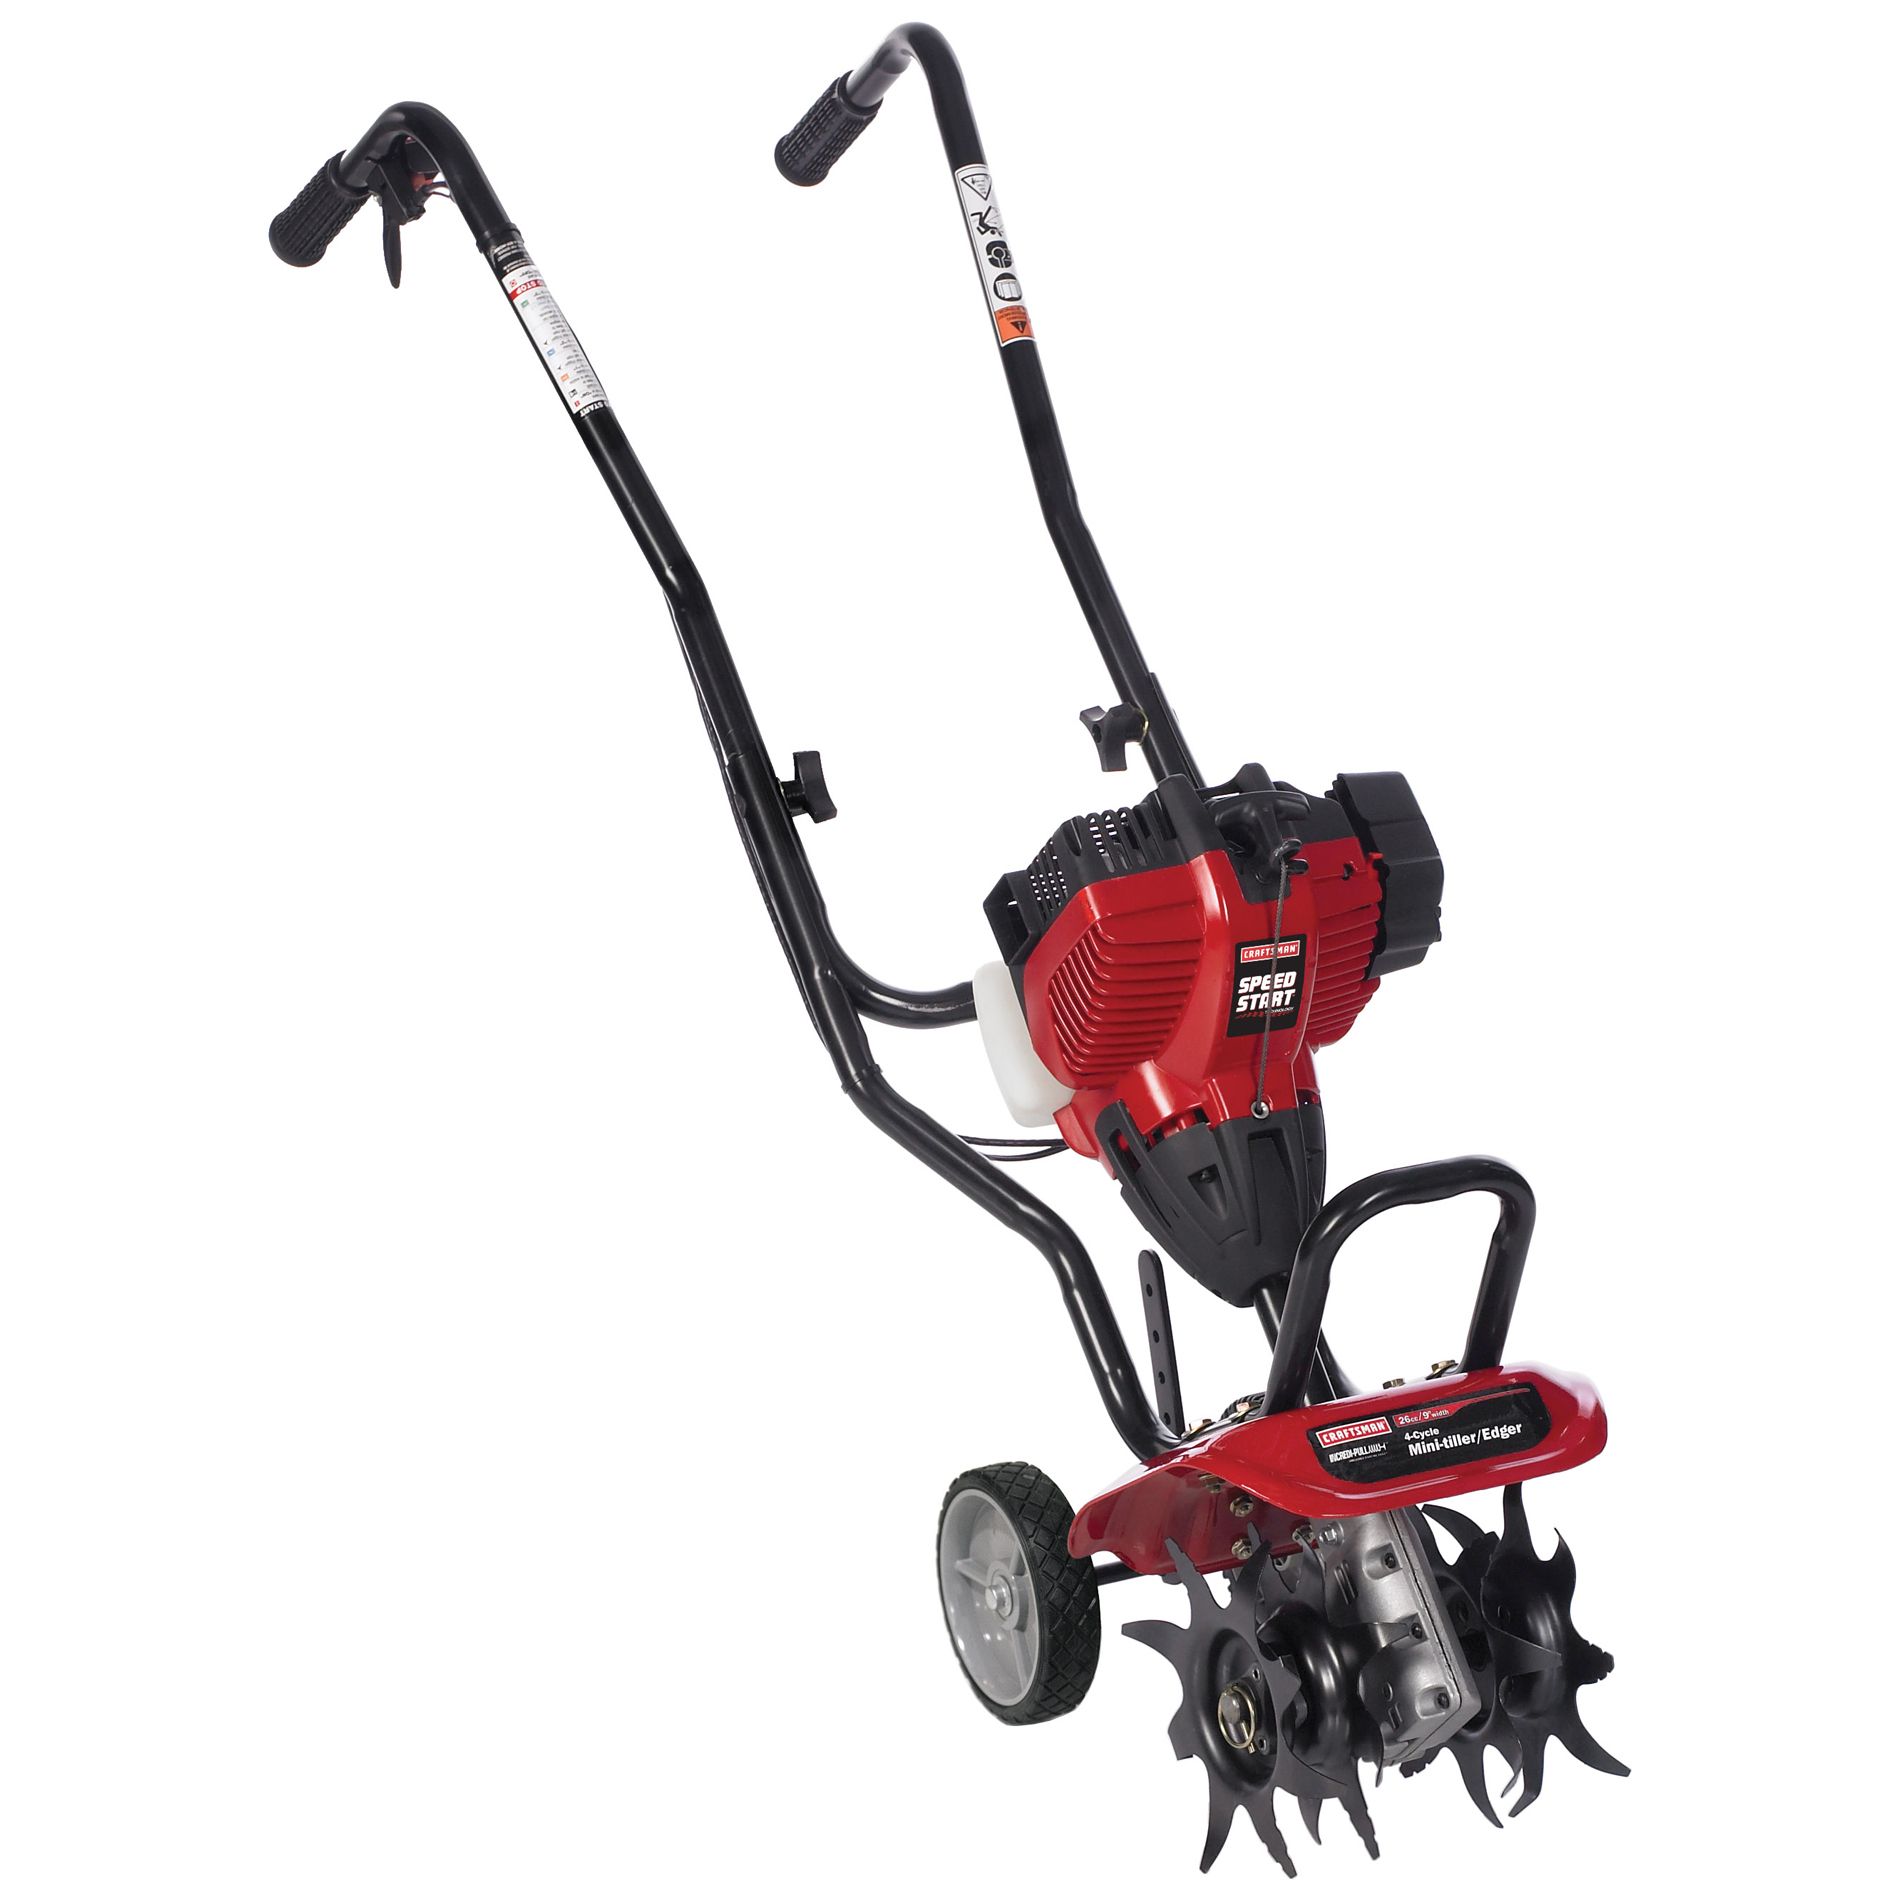 Craftsman 29937 4 Cycle Mini Tiller Sears Outlet